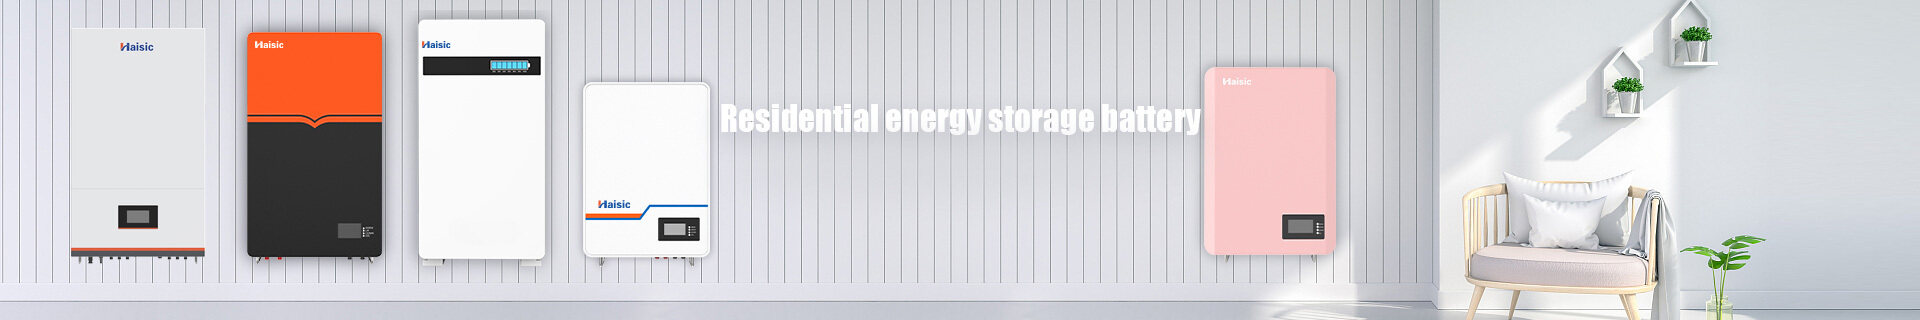 solar storage battery for home, solar energy storage for homes